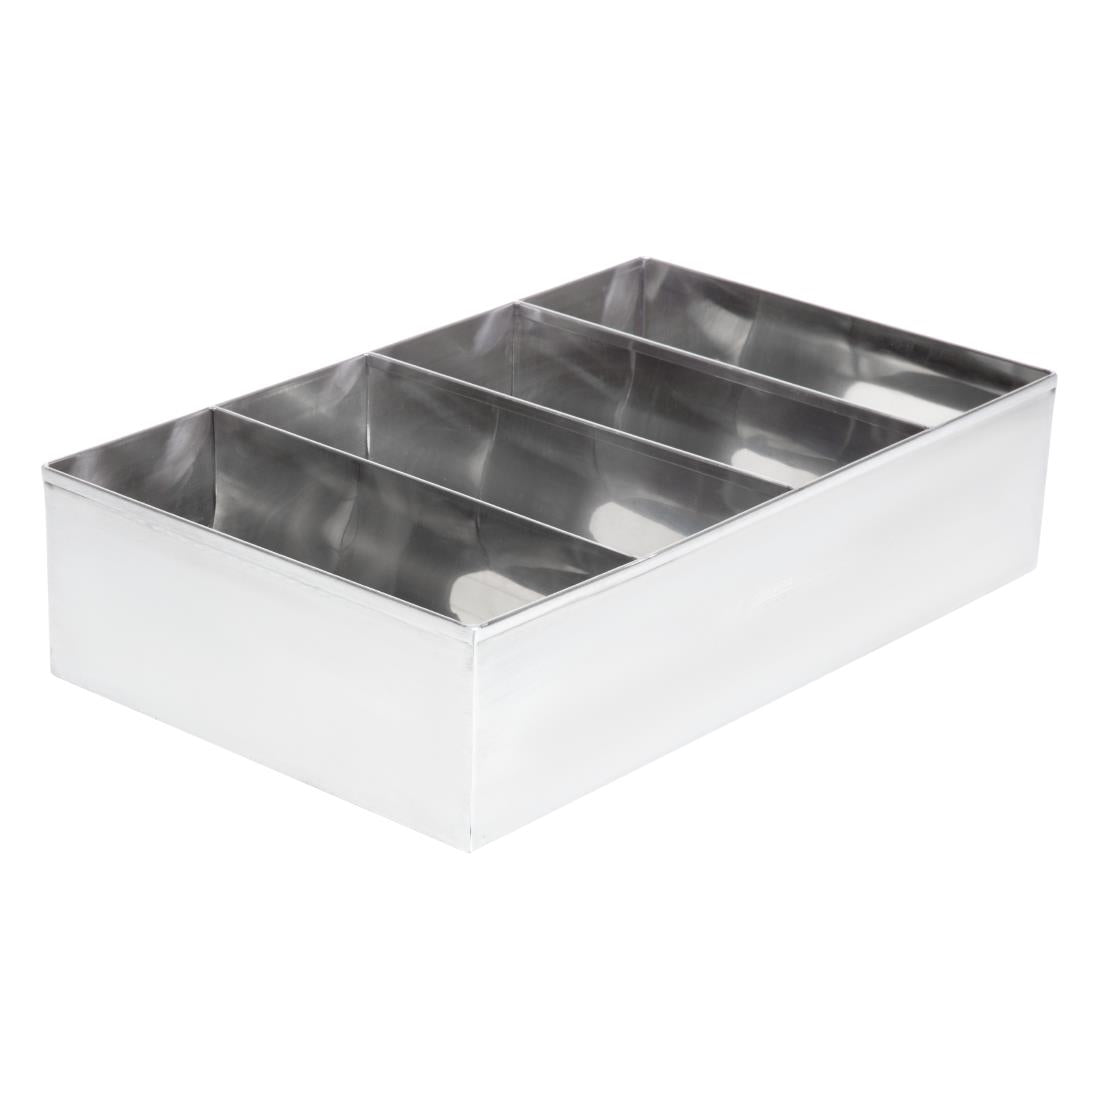 DM274 Olympia Cutlery Holder Stainless Steel JD Catering Equipment Solutions Ltd